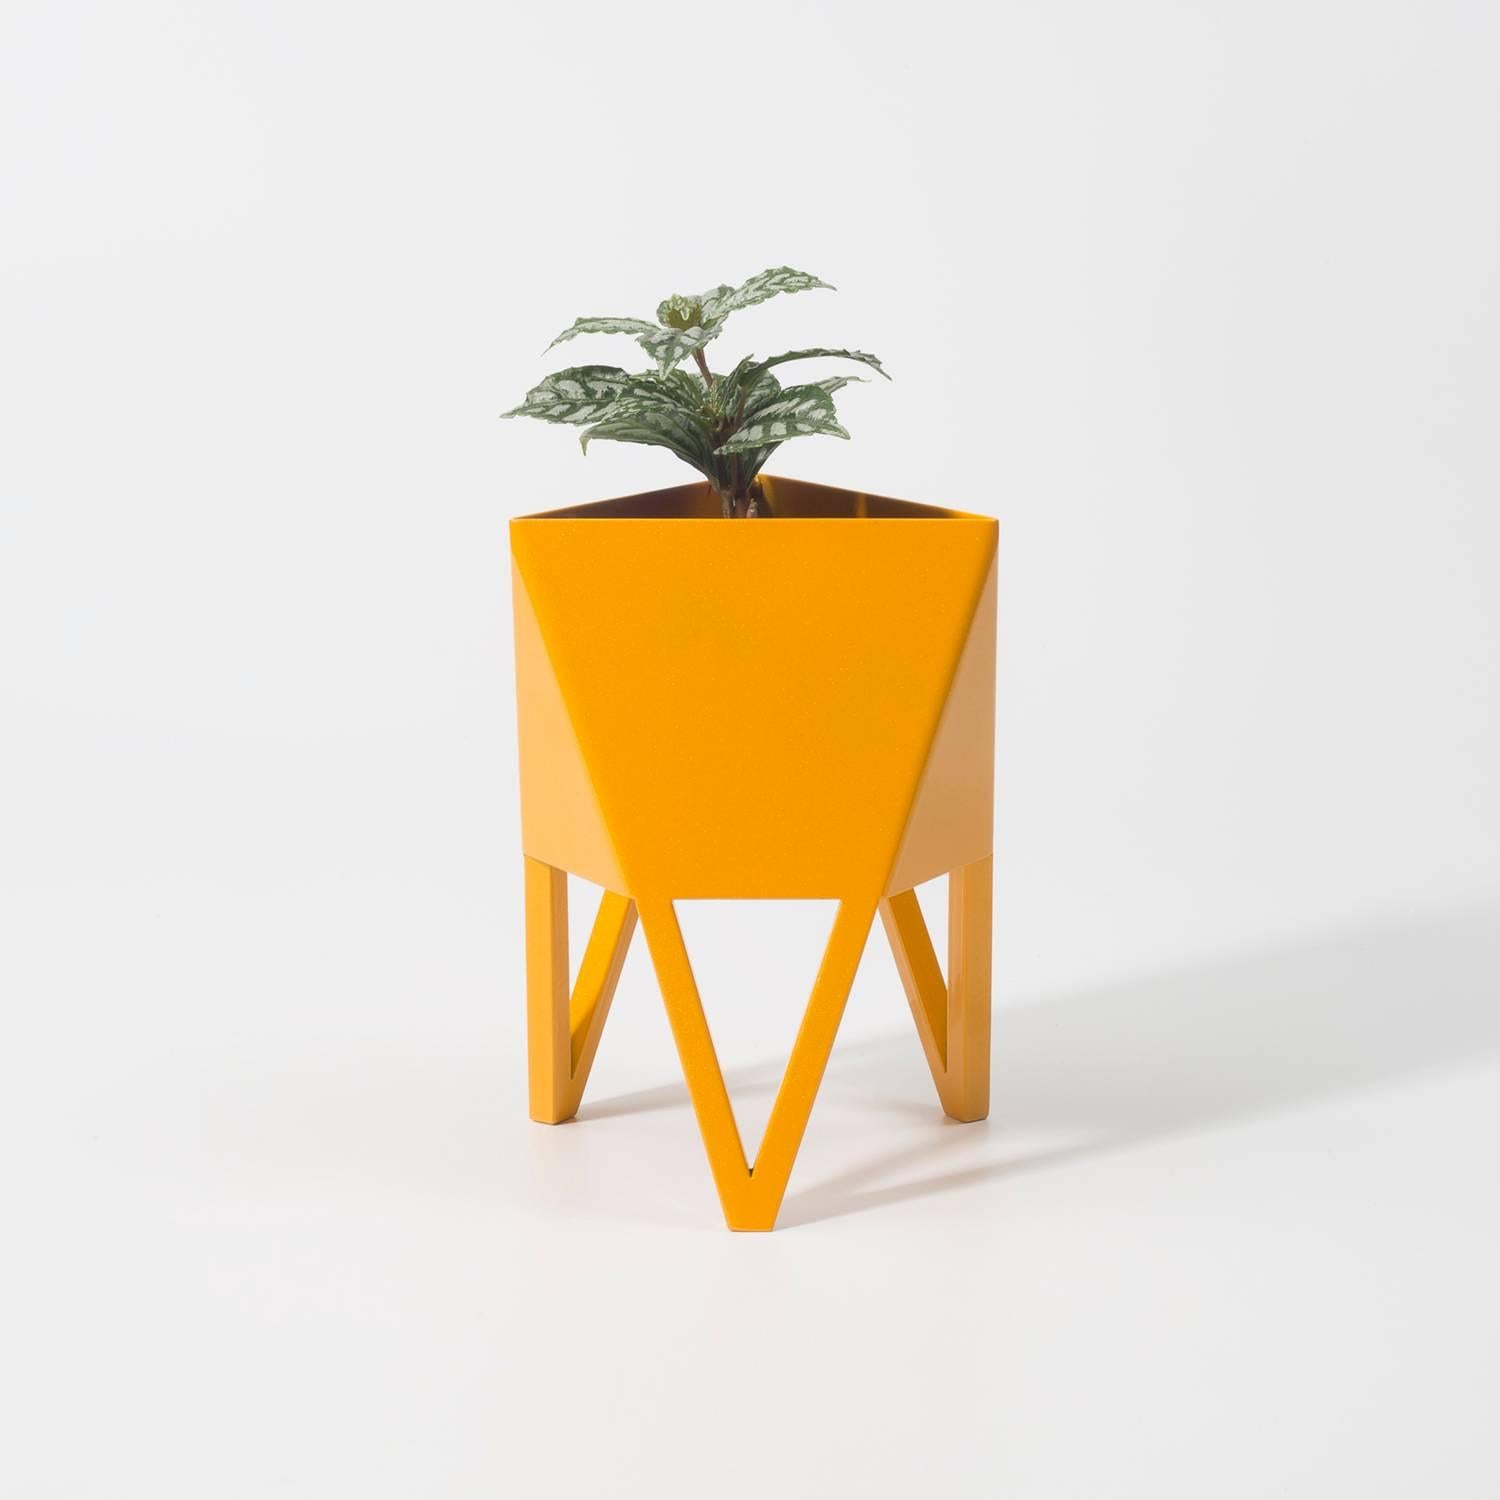 Deca Planter in Flat Black Steel, Small, by Force/Collide 3